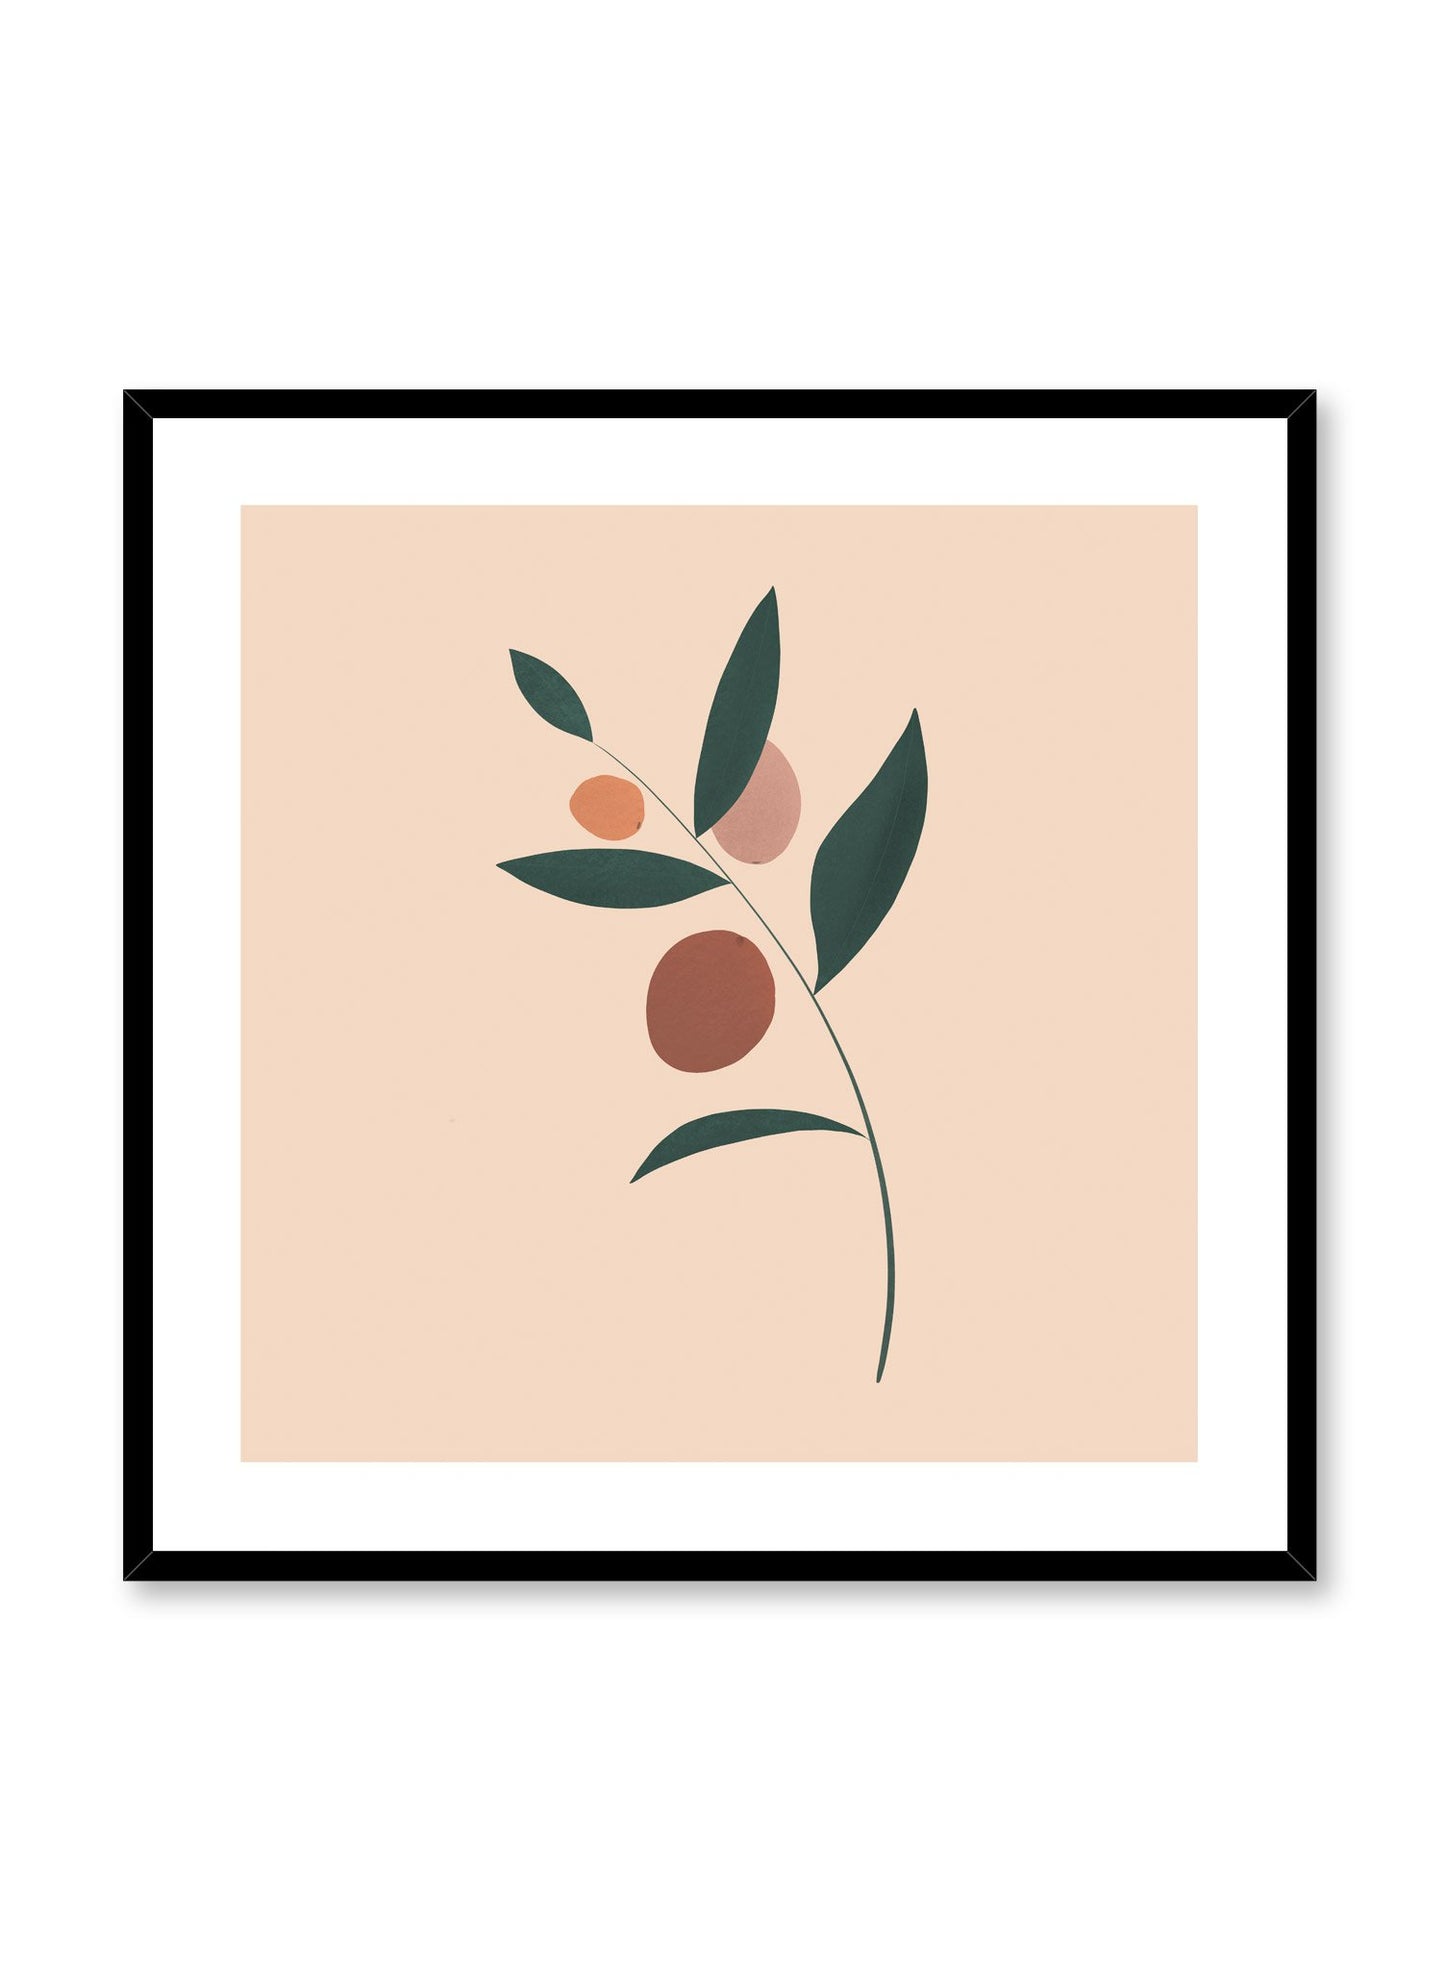 Modern minimalist poster by Opposite Wall with single leaf on beige background